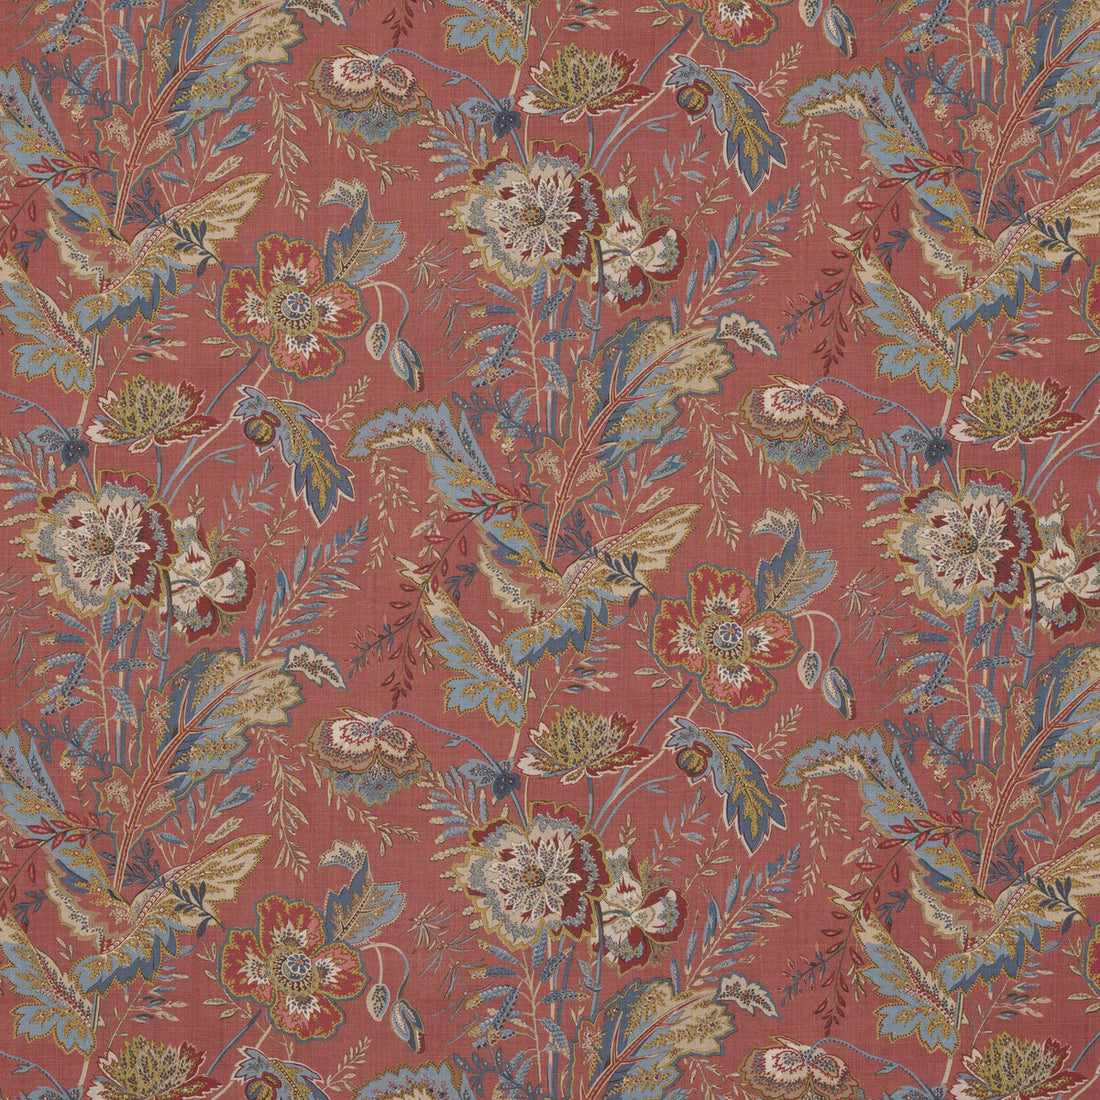 Indienne Flower fabric in red color - pattern BP10938.4.0 - by G P &amp; J Baker in the Caspian collection